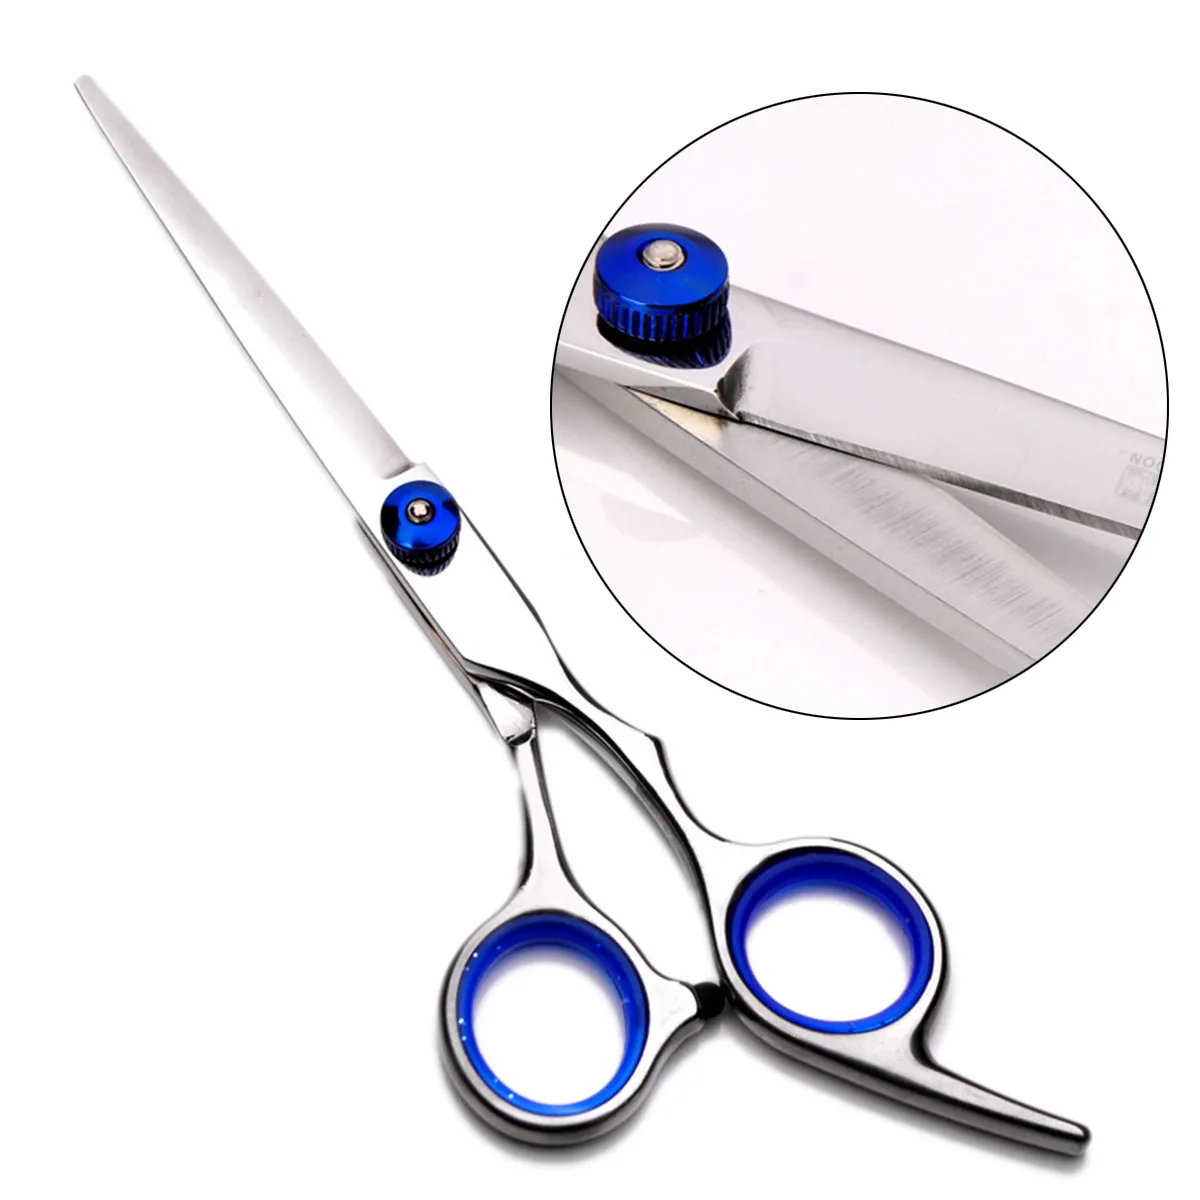 

5pcs Stainless Steel Salon Hairdressing Shears 6 inch Cutting Thinning Styling Tool Hair Scissors Regular Flat Teeth Blades